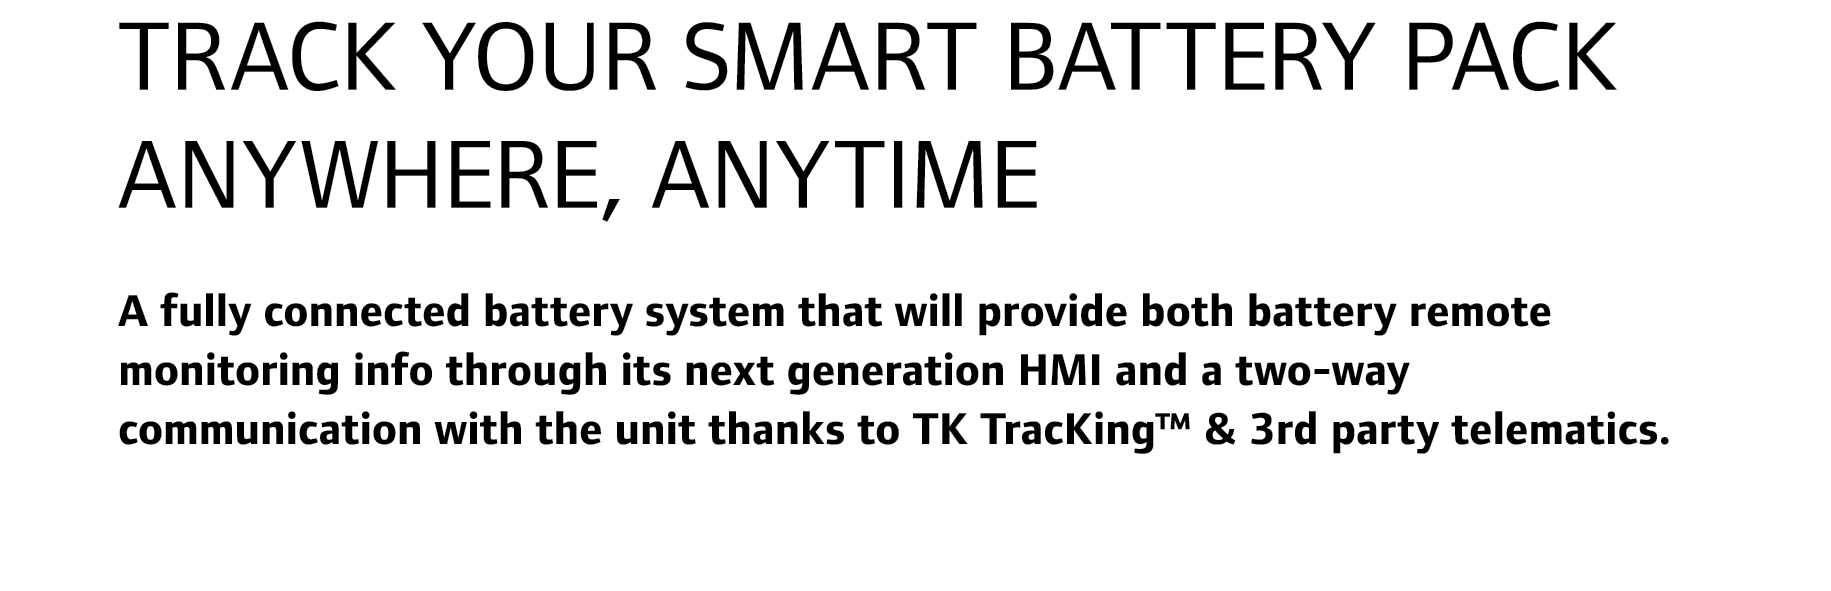 TRACK YOUR SMART BATTERY PACK ANYWHERE, ANYTIME A fully connected battery system that will provide both battery remot...